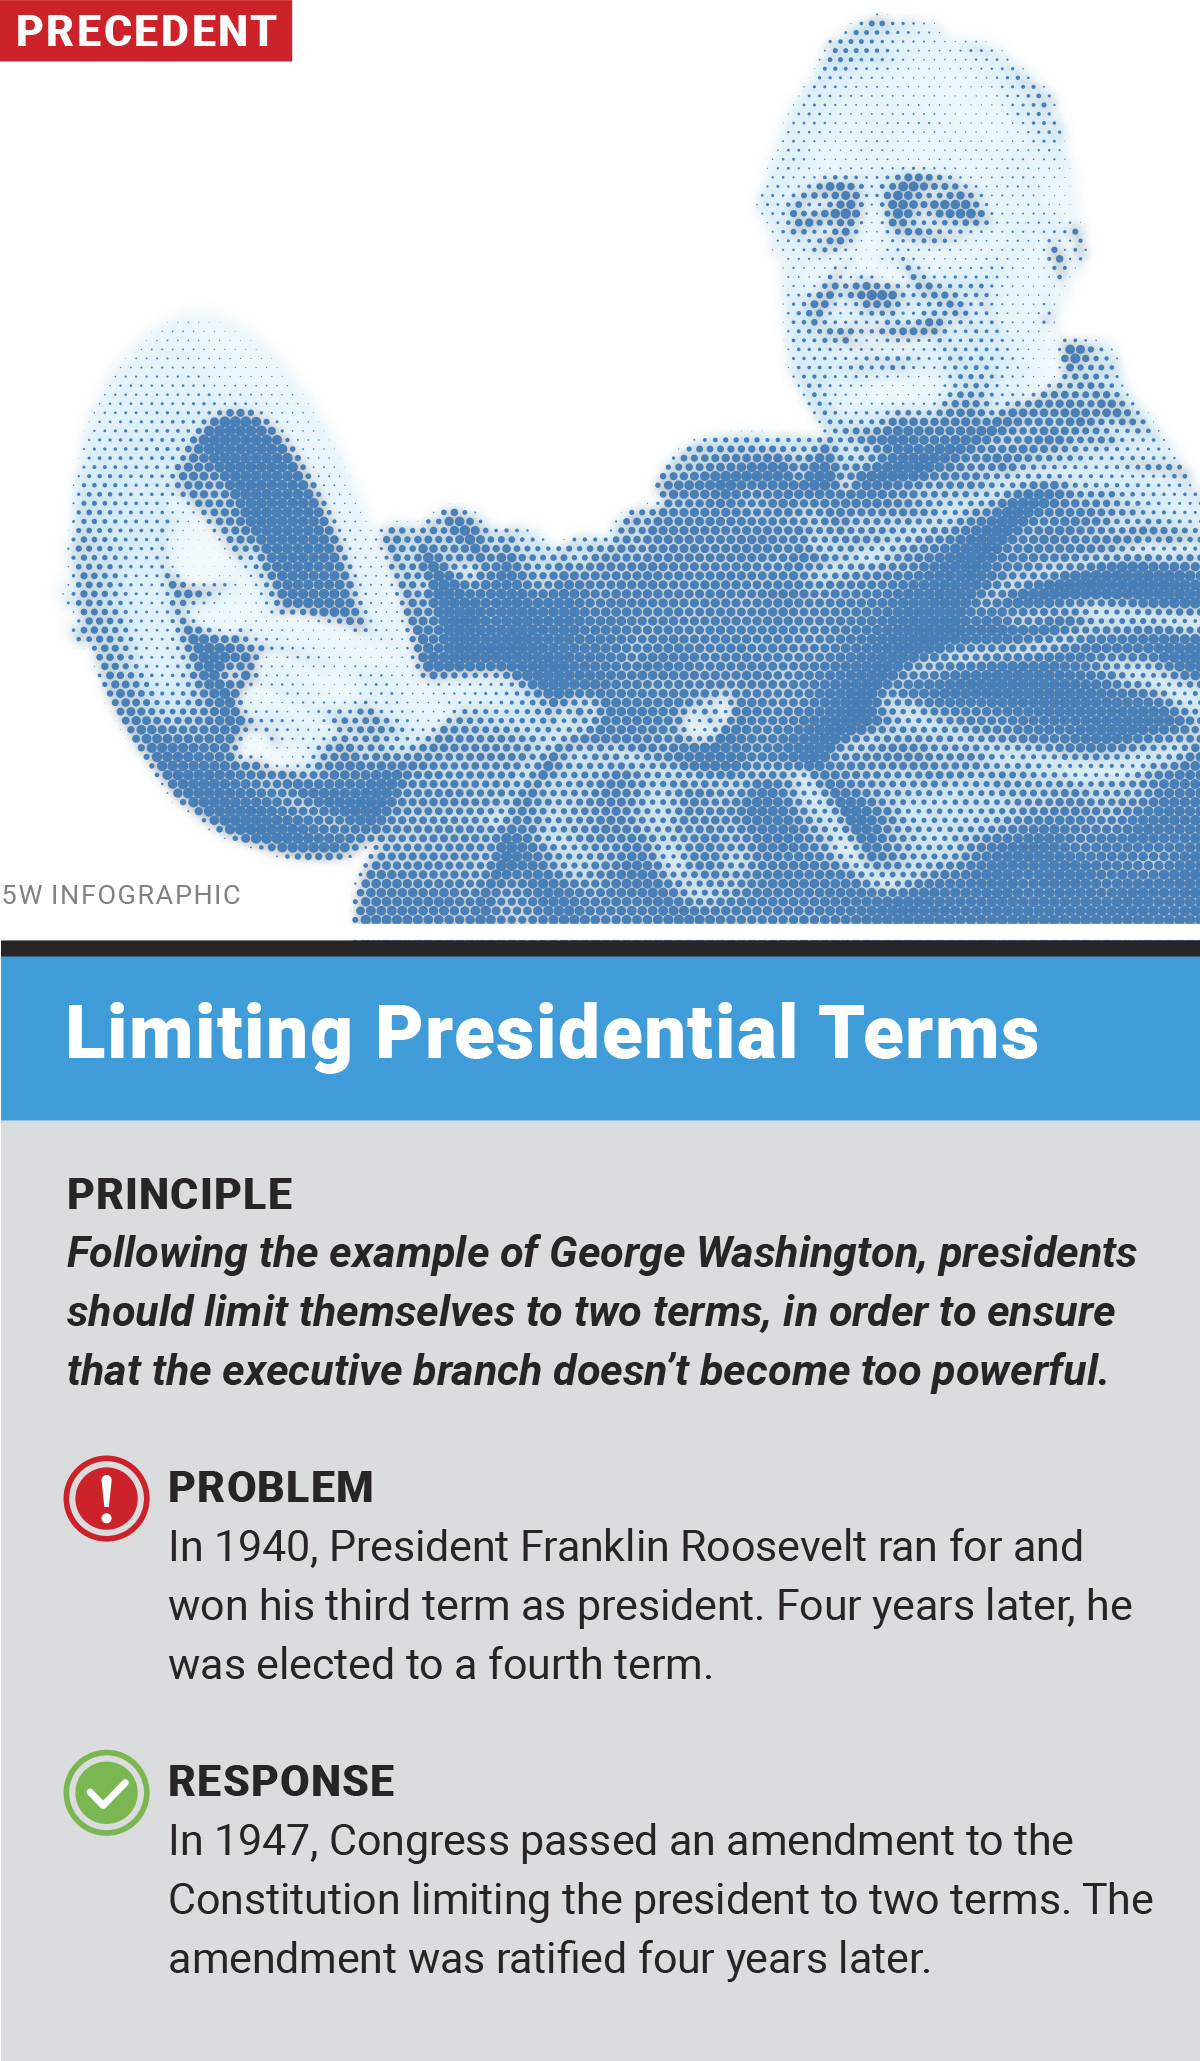 Limiting Presidential Terms graphic